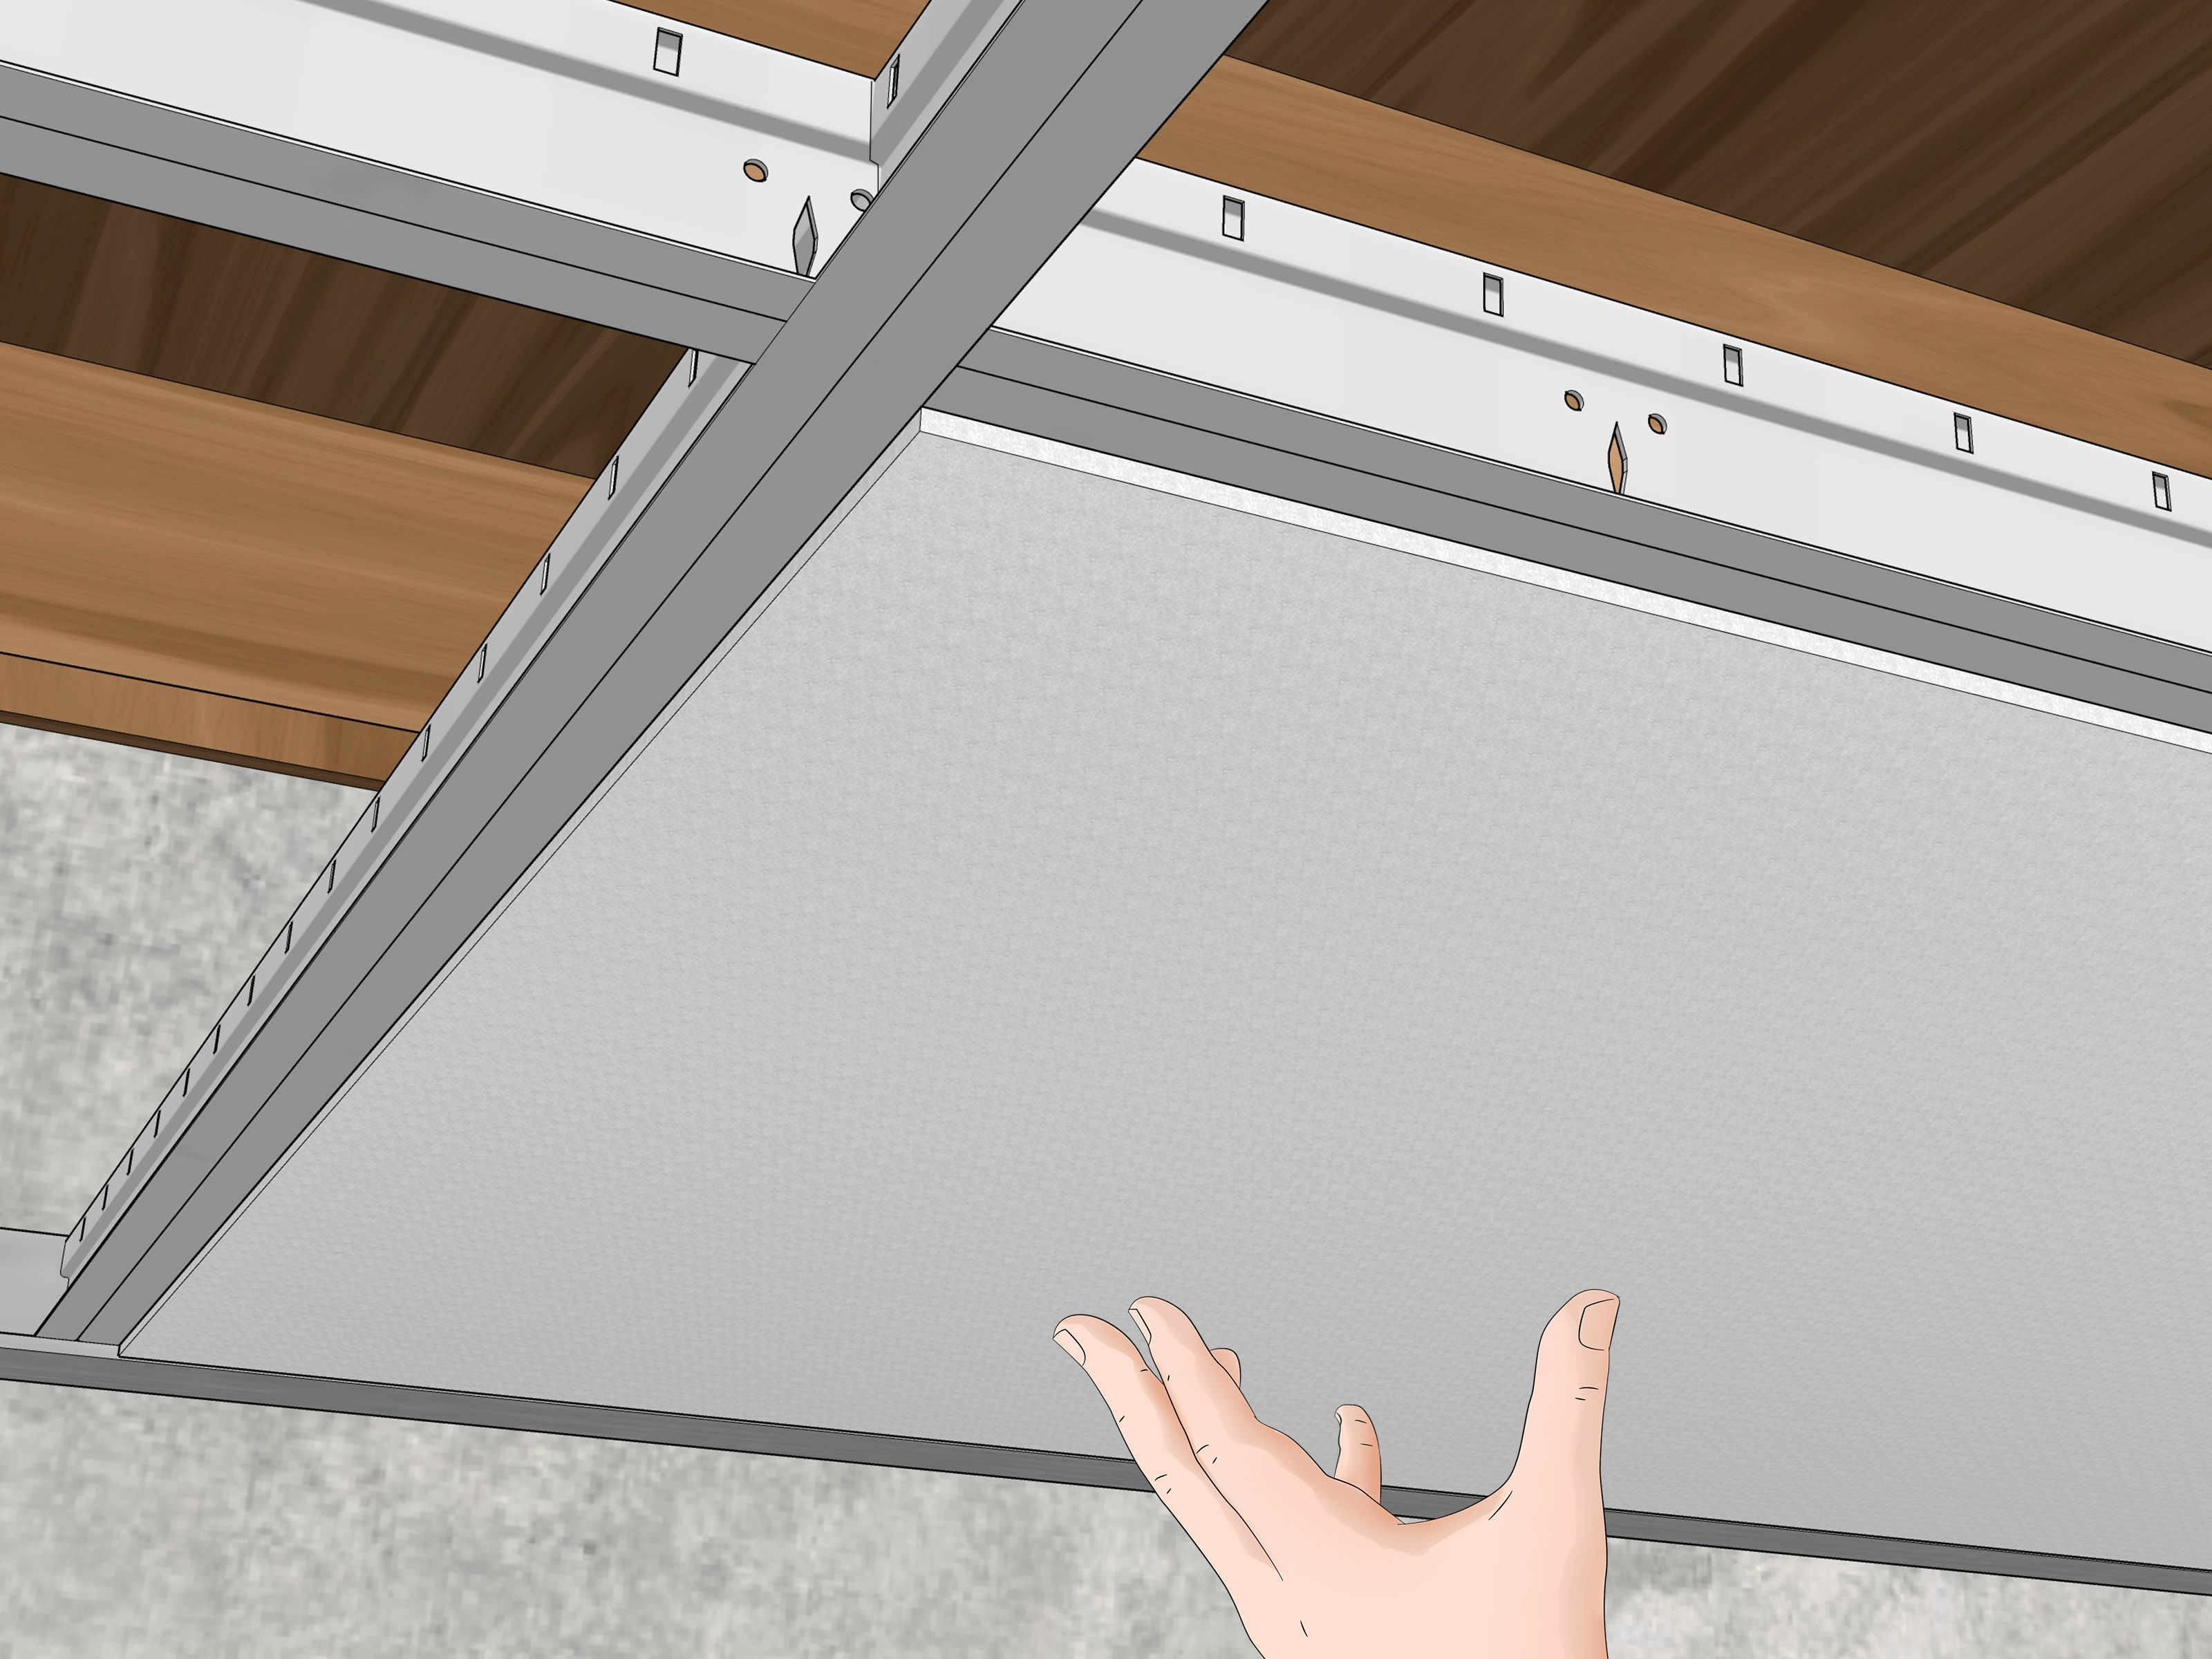 Image Titled Install A Drop Ceiling Step - Drop Ceiling - HD Wallpaper 